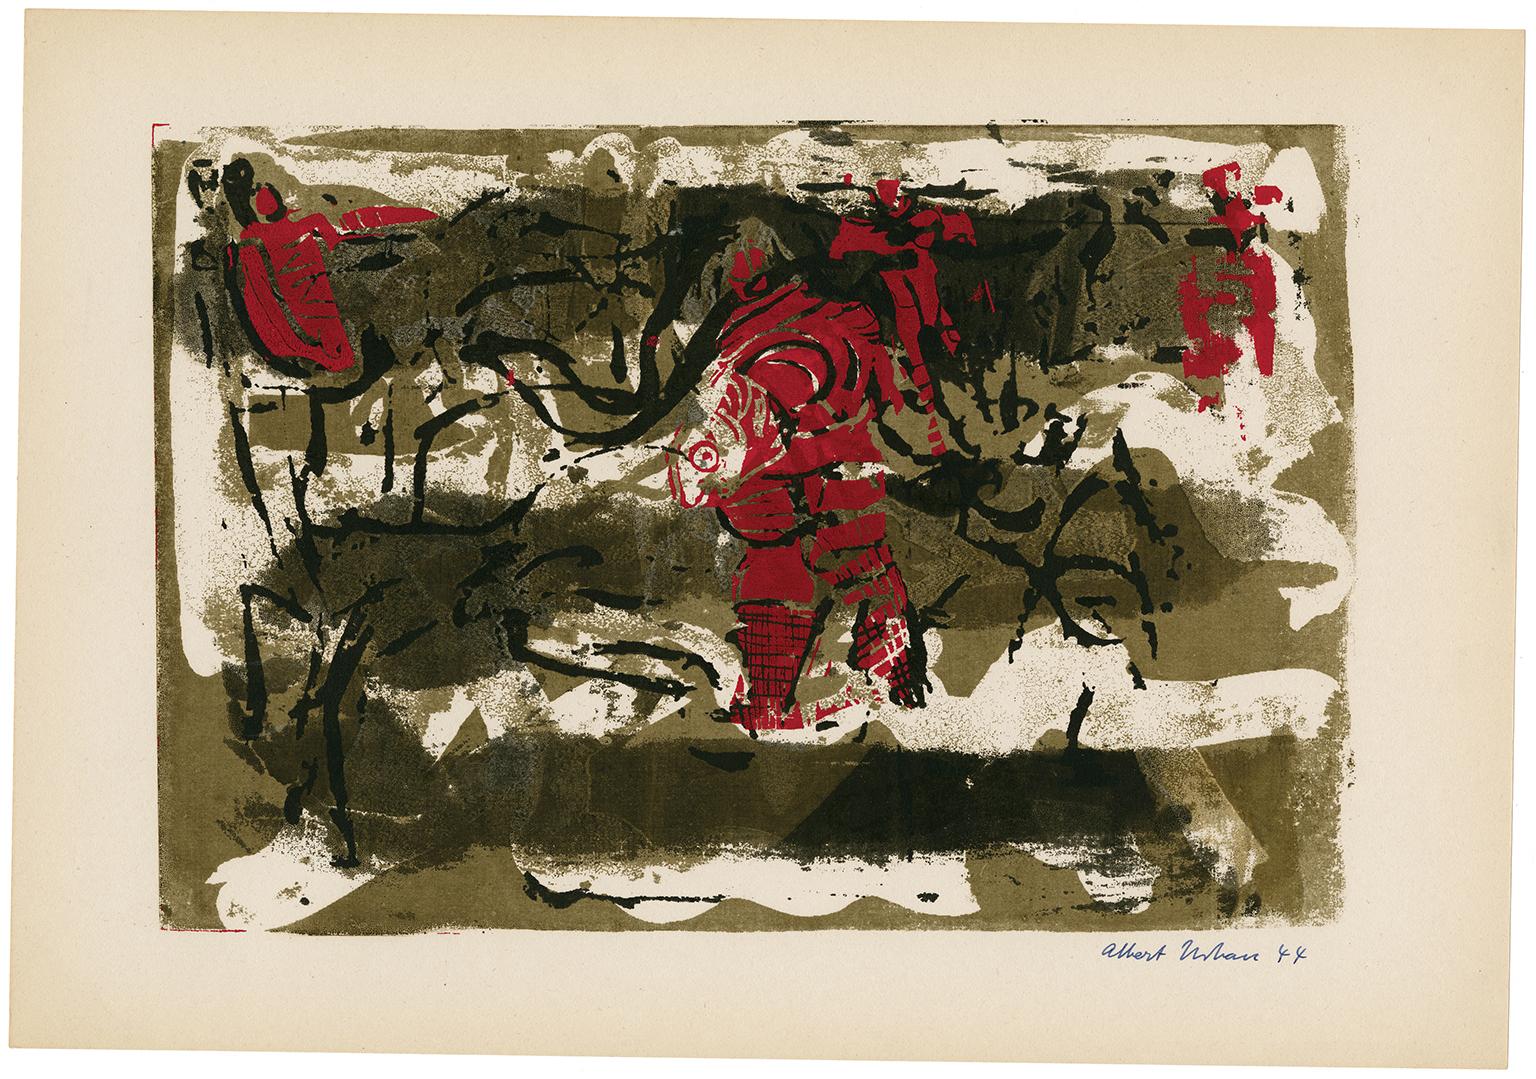 Untitled Abstraction (Figures in Red) - Print by Albert Urban